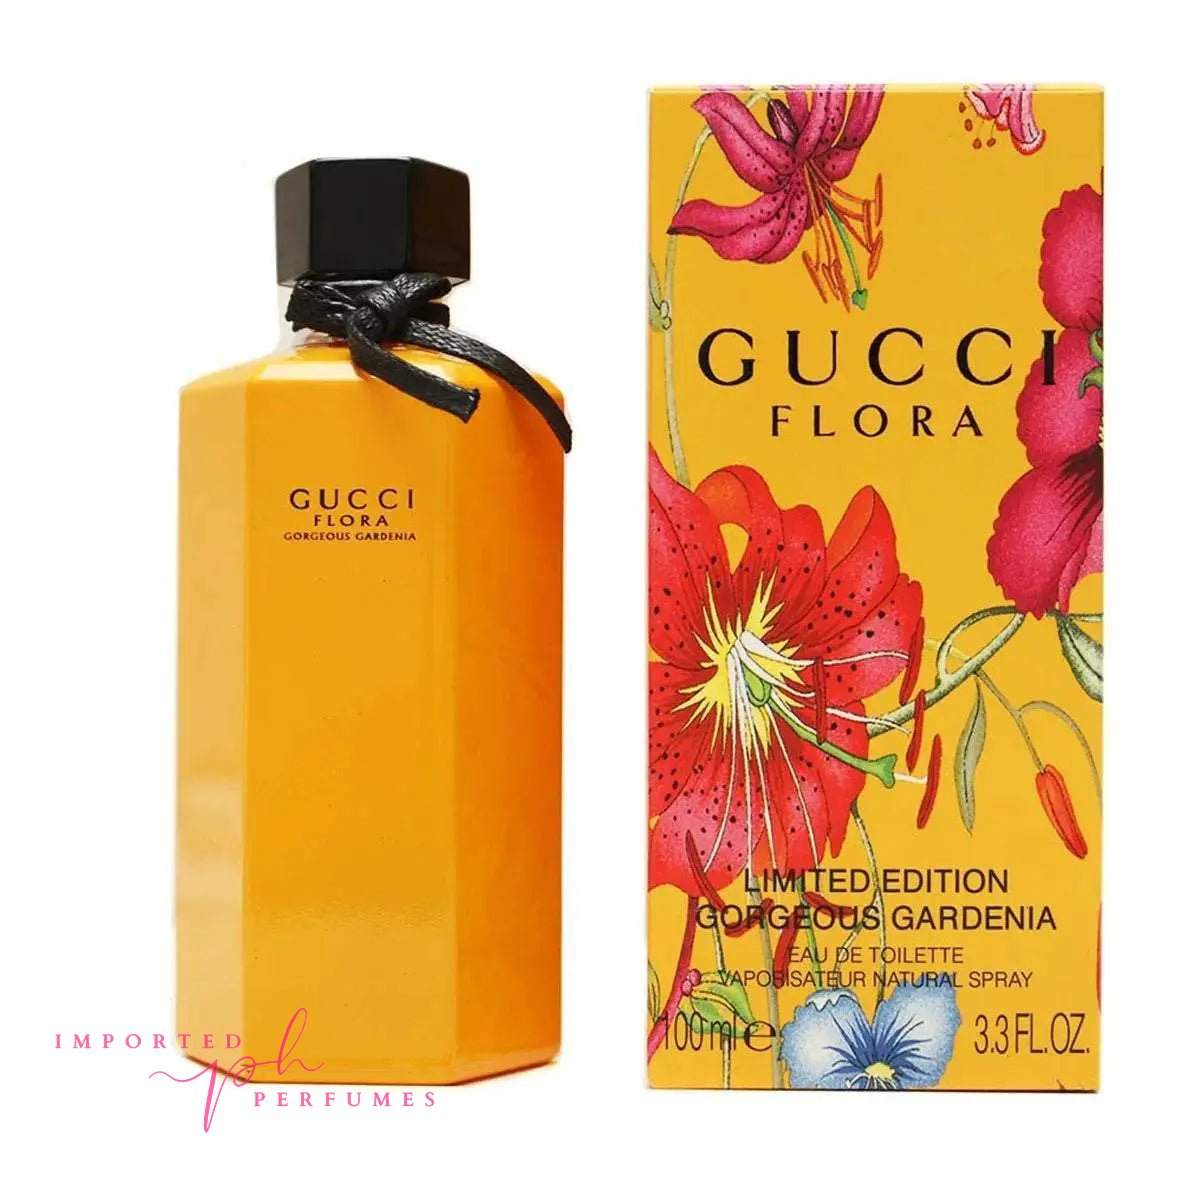 [TESTER] Gucci Flora Gorgeous Gardenia Limited Edition 2018 For Women 100ml-Imported Perfumes Co-Floral,Gucci,Limited Edittion,test,TESTER,women,Yellow